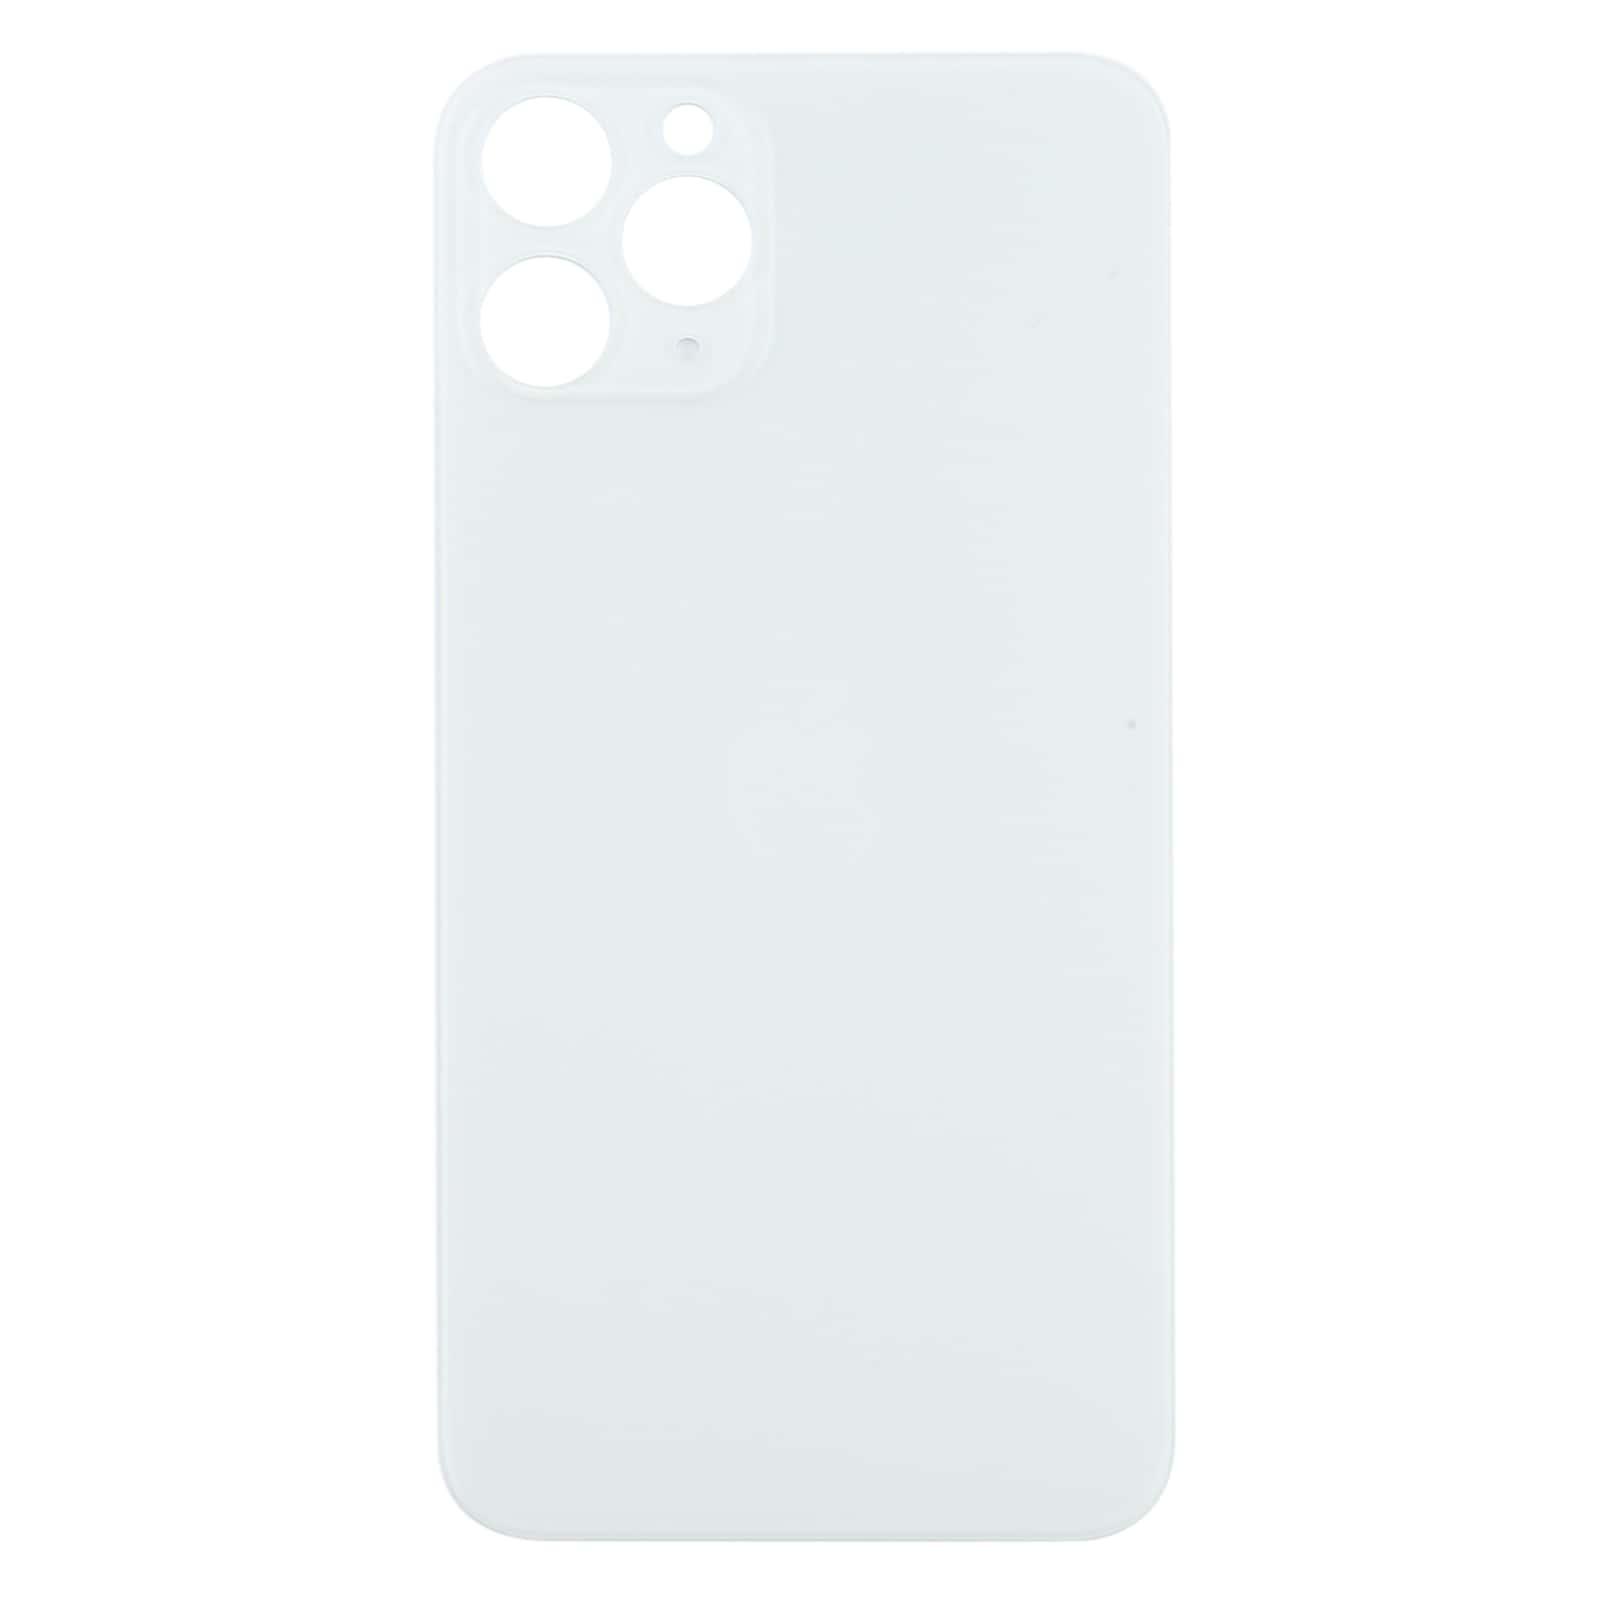 Back Glass Panel for  iPhone 12 Pro Max White